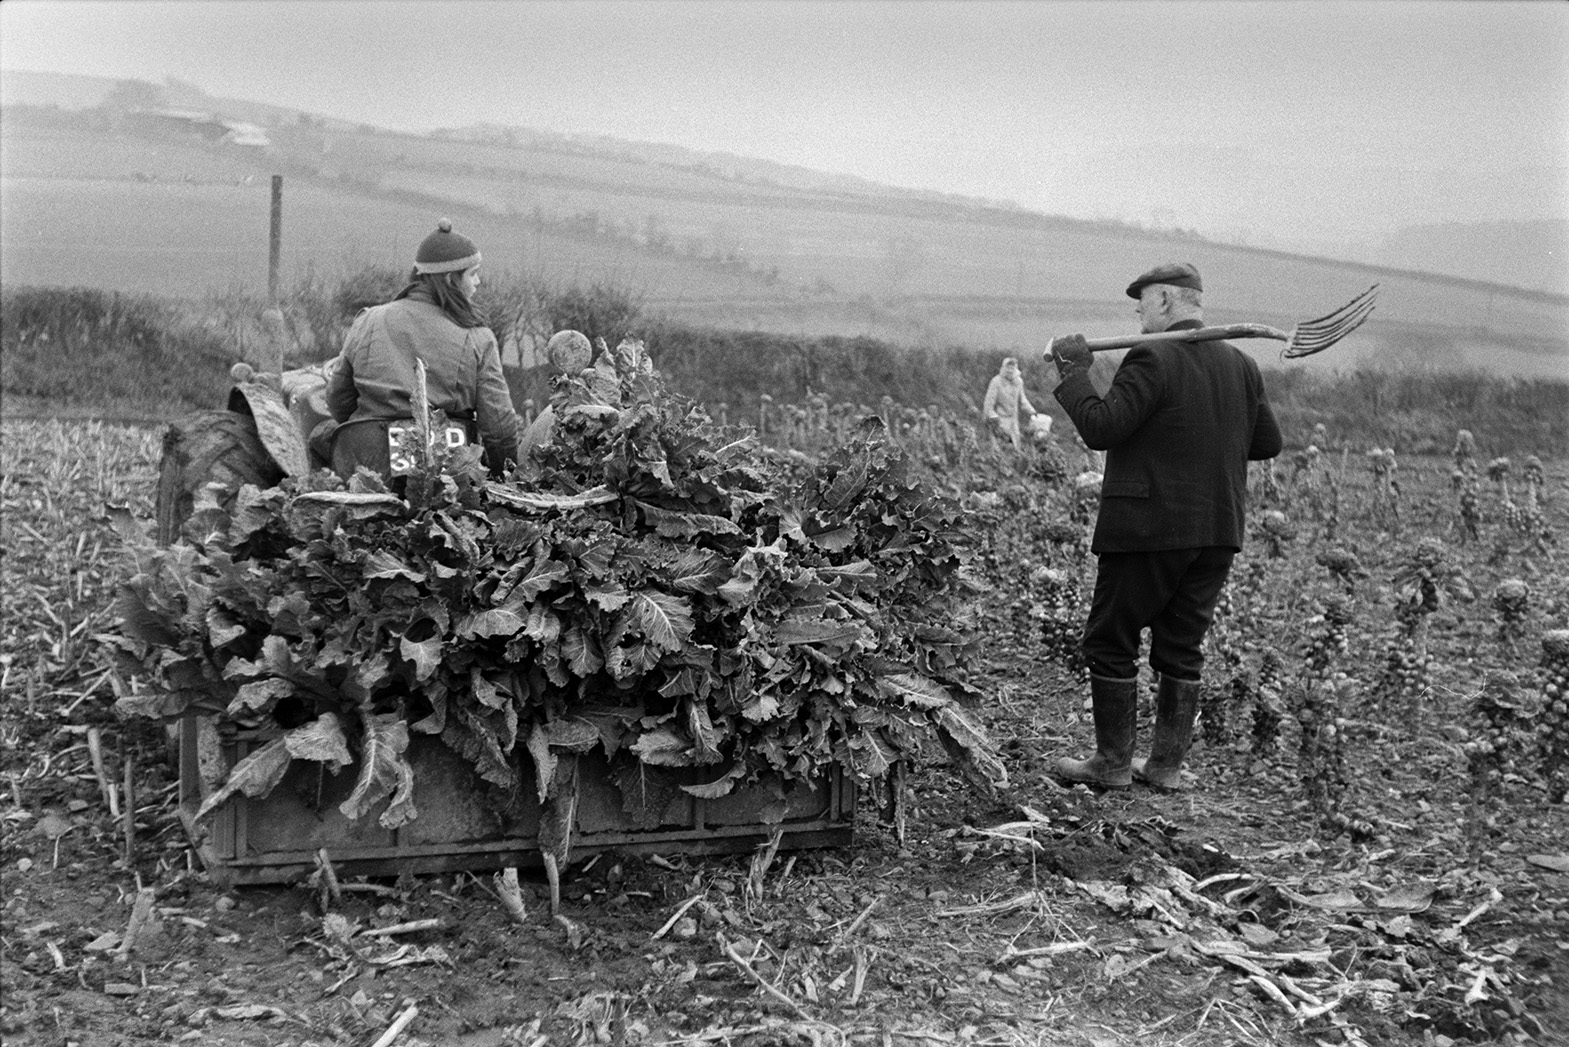 Derek Bright driving a tractor and link box full of cauliflowers in a field at Mill Road Farm, Beaford. A man is stood next to him holding a fork on his shoulder. Other people can be seen in the field near a crop of brussel sprouts. The farm was also known as Jeffrys.